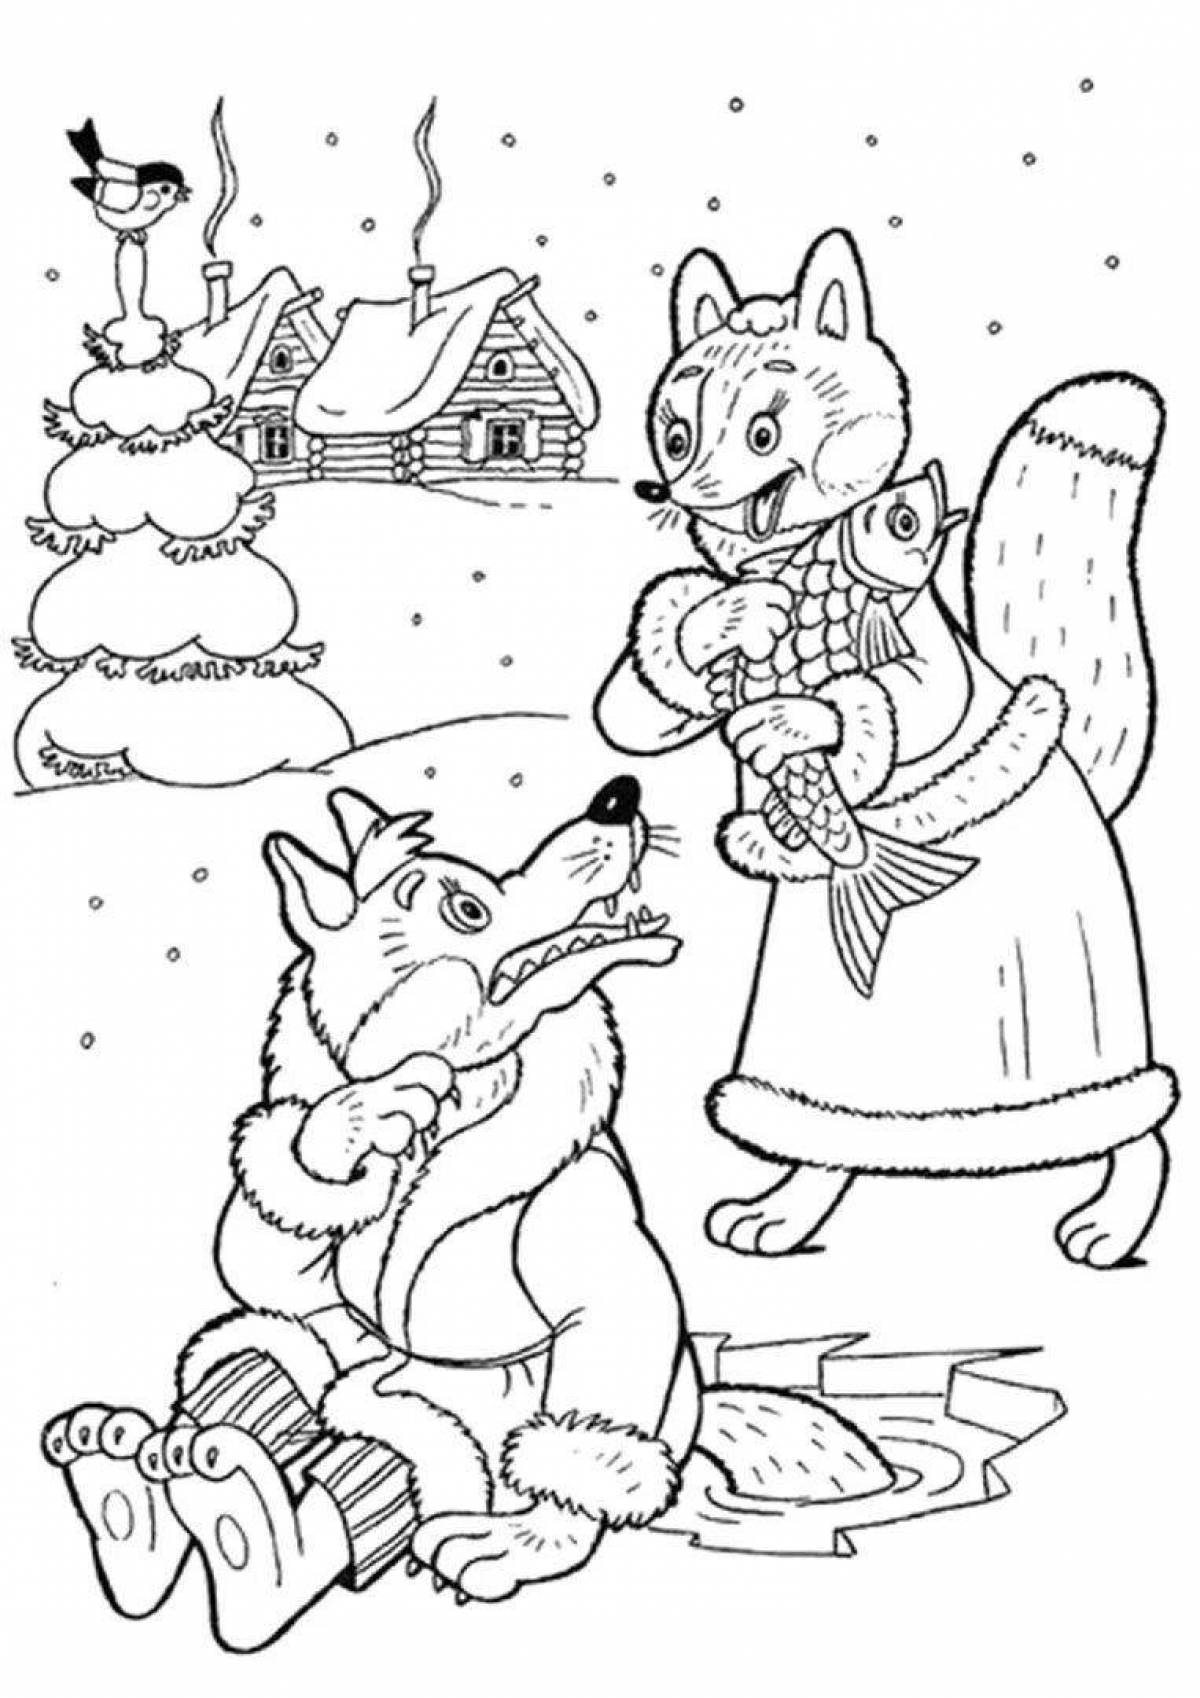 Great coloring book based on Russian folk tales